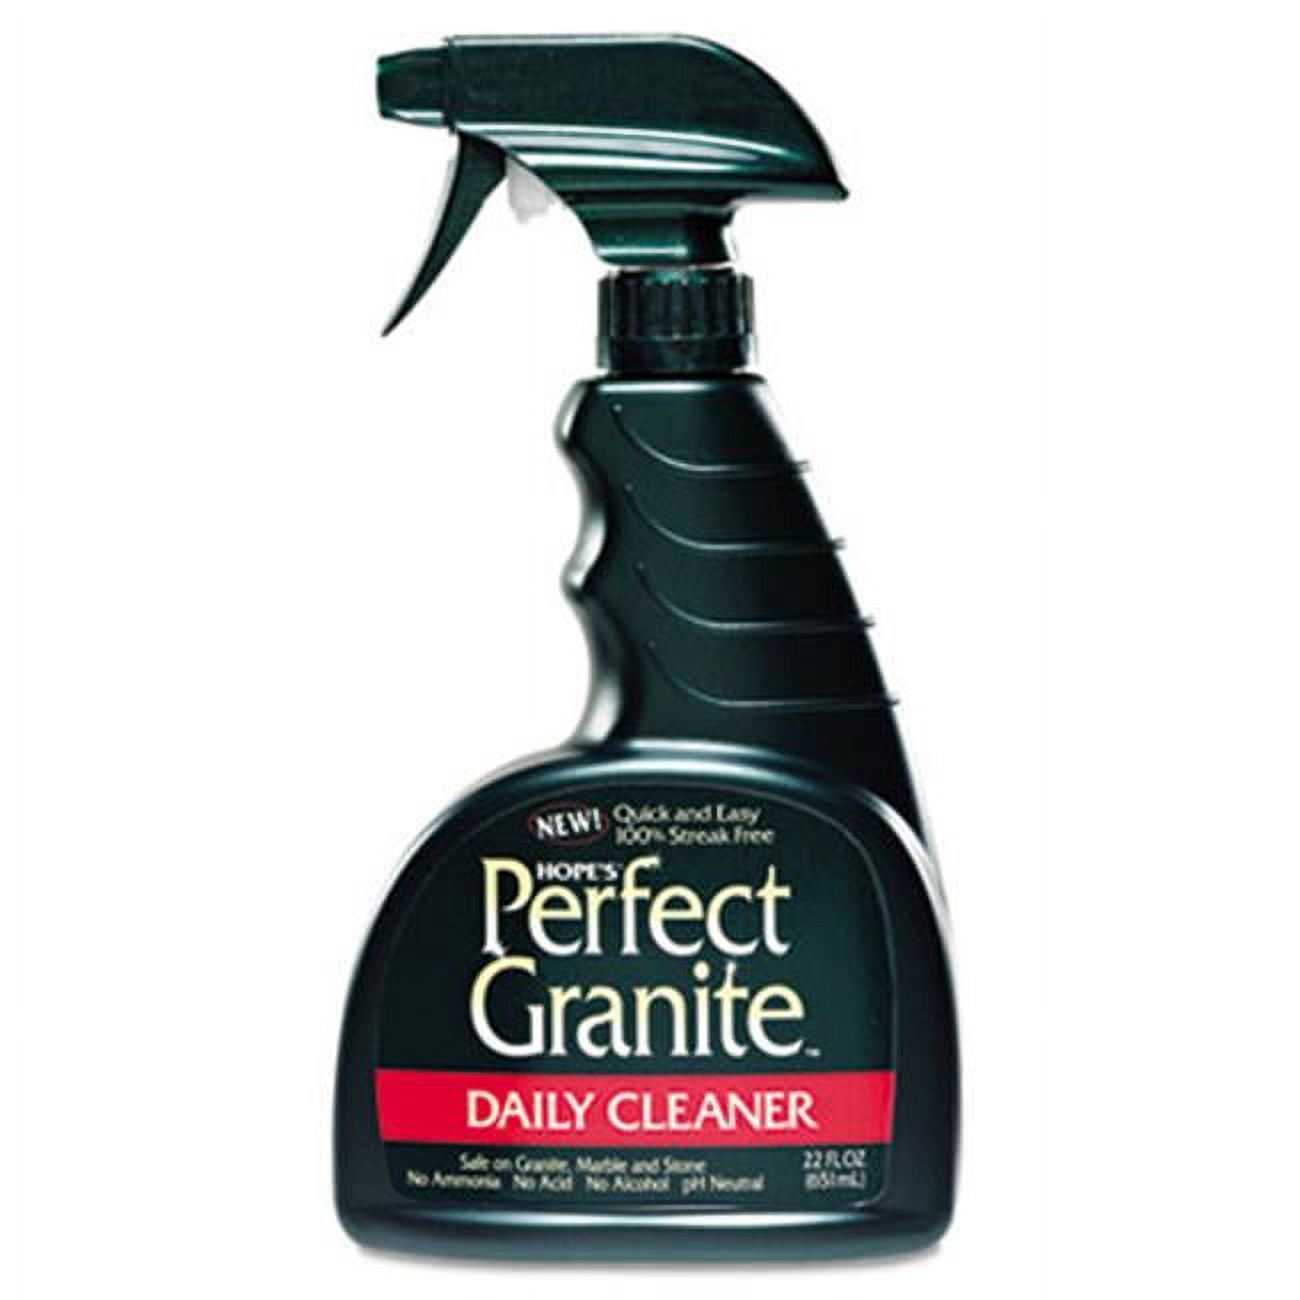 Hope’s Perfect Granite & Marble Countertop Cleaner, Stain Remover and Polish, Streak-Free, Ammonia-Free, 22 Ounce, Pack of 1 - image 1 of 7